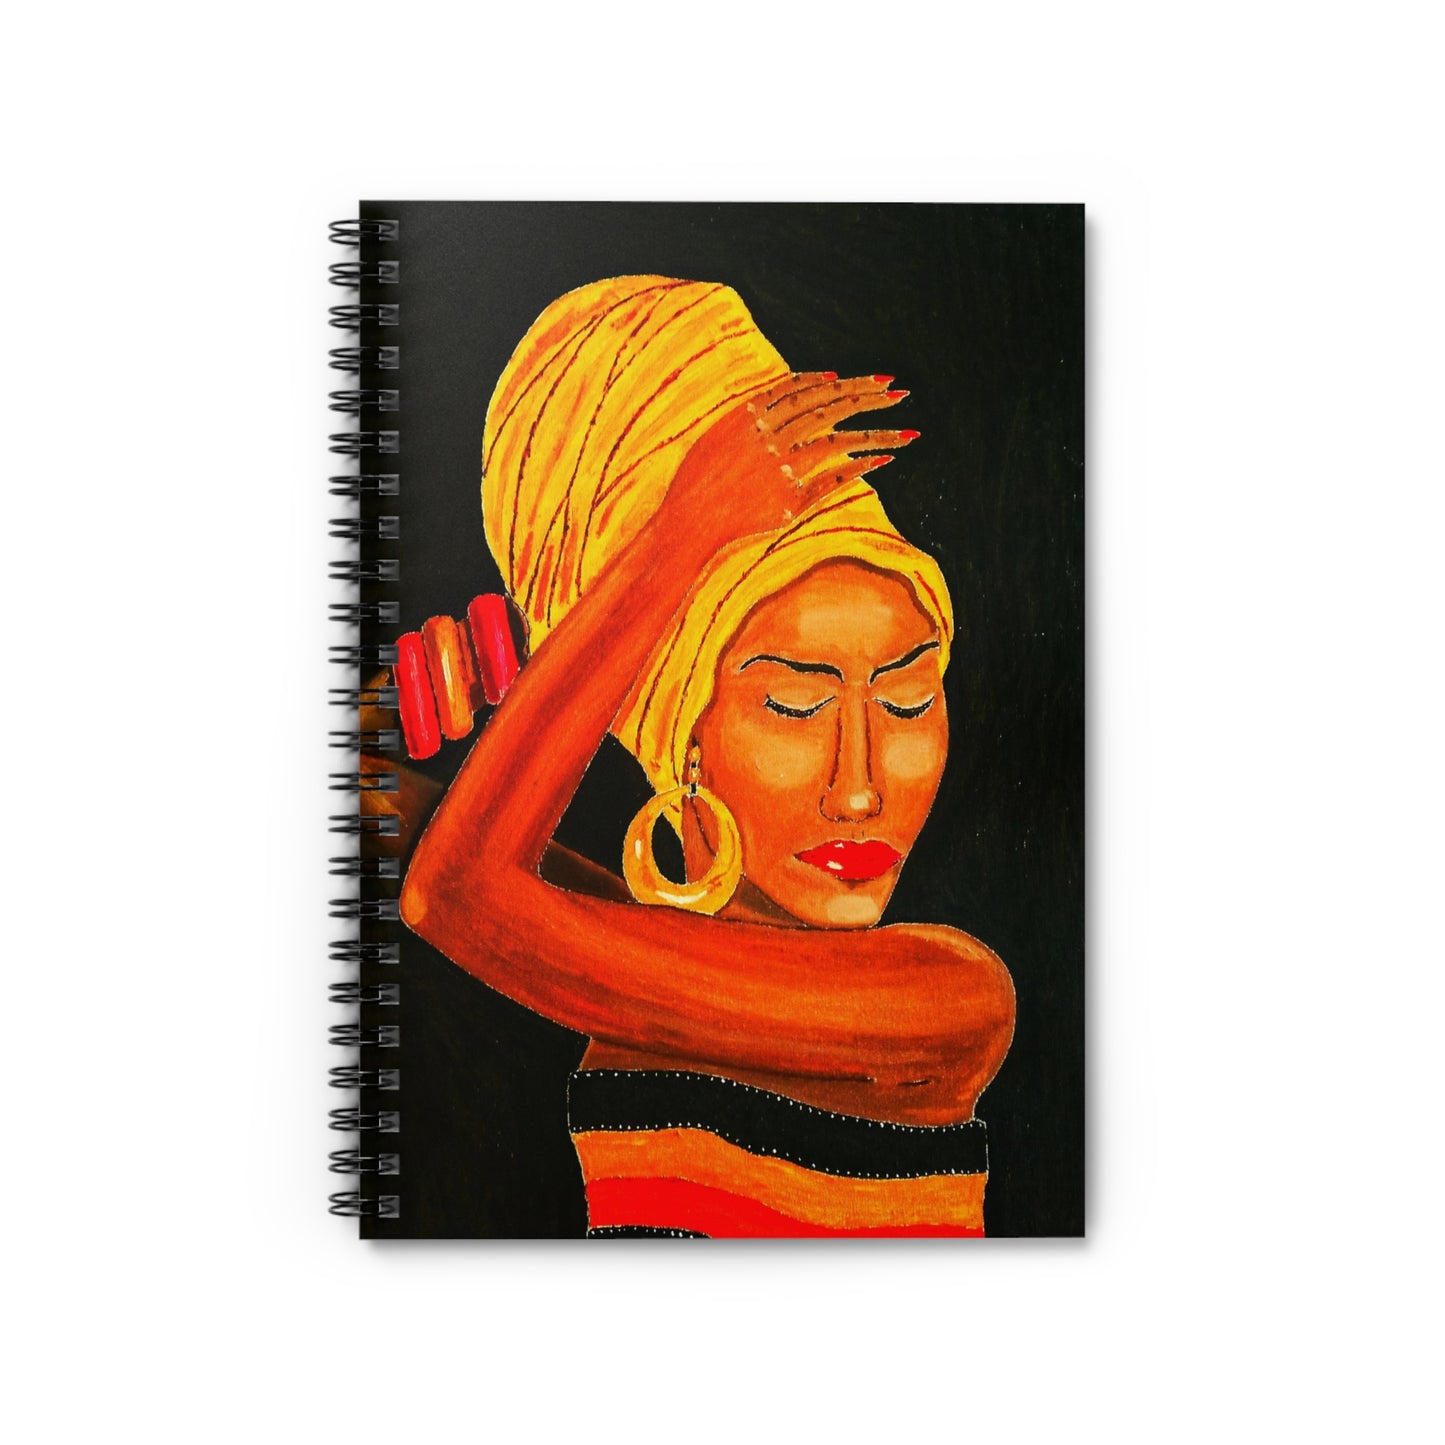 Stylish Yellow Red Spiral Notebook - Ruled Line